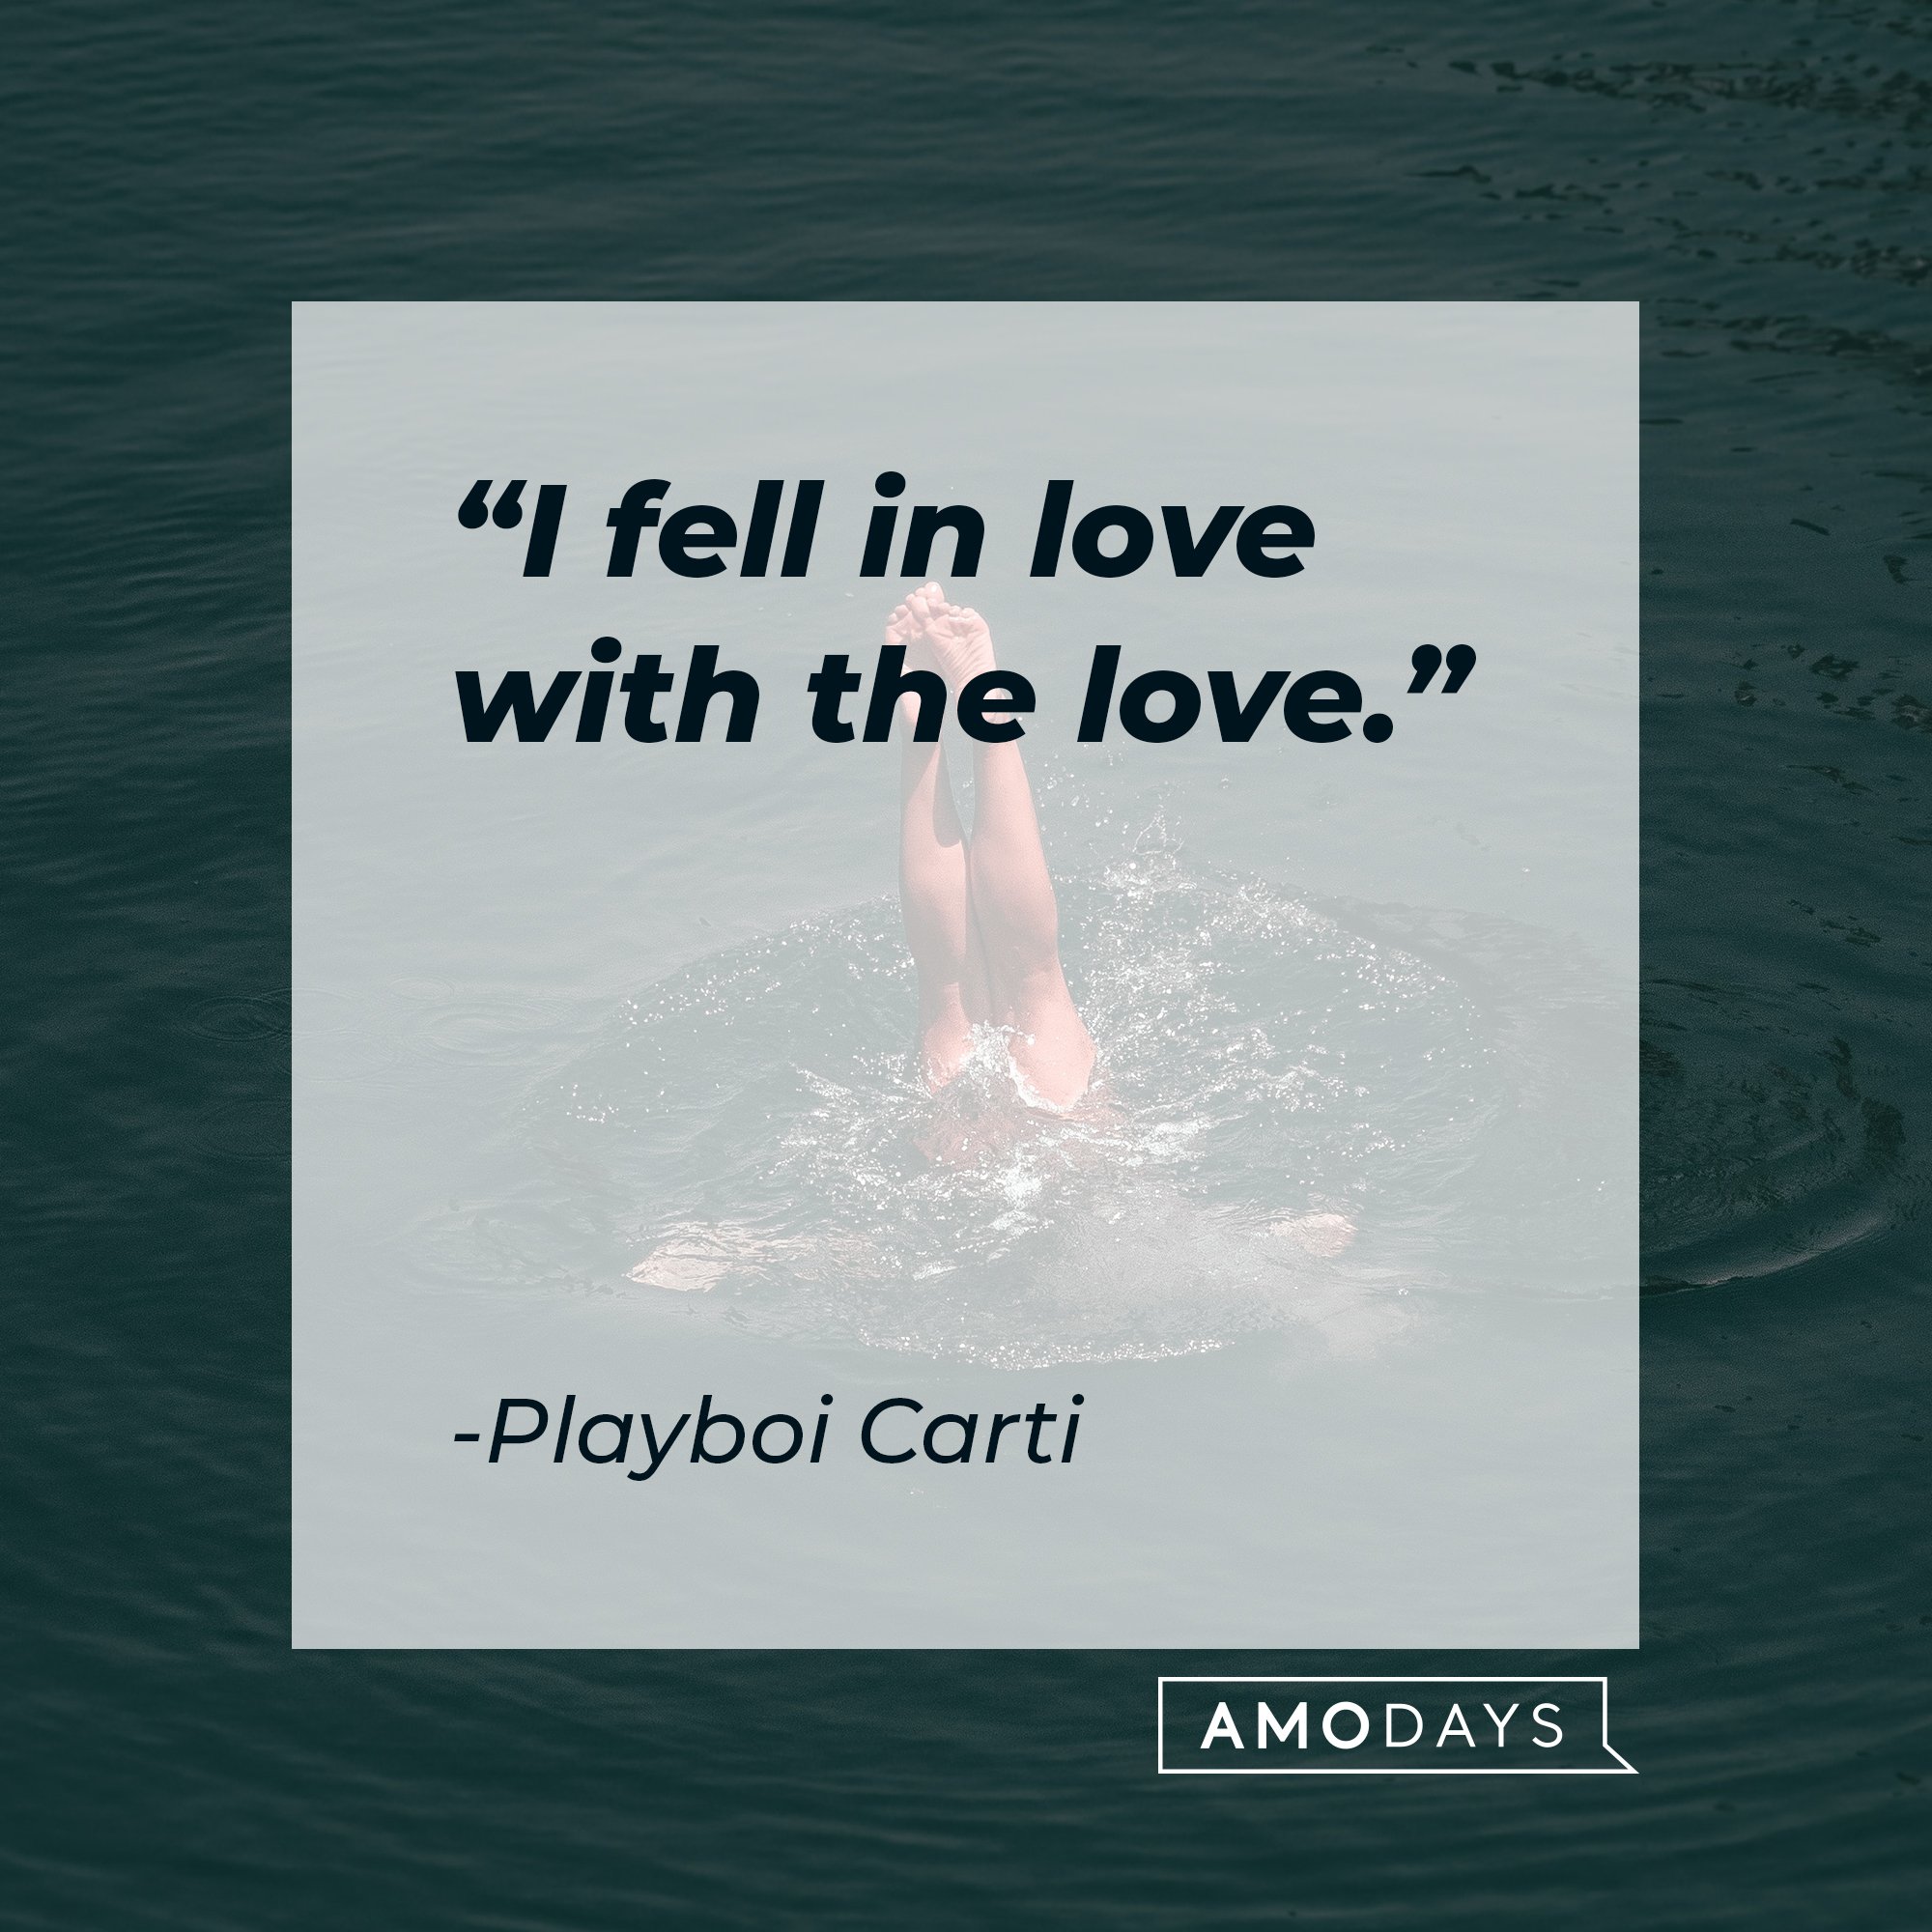 Playboi Carti ‘s quote: "I fell in love with the love." | Image: AmoDays